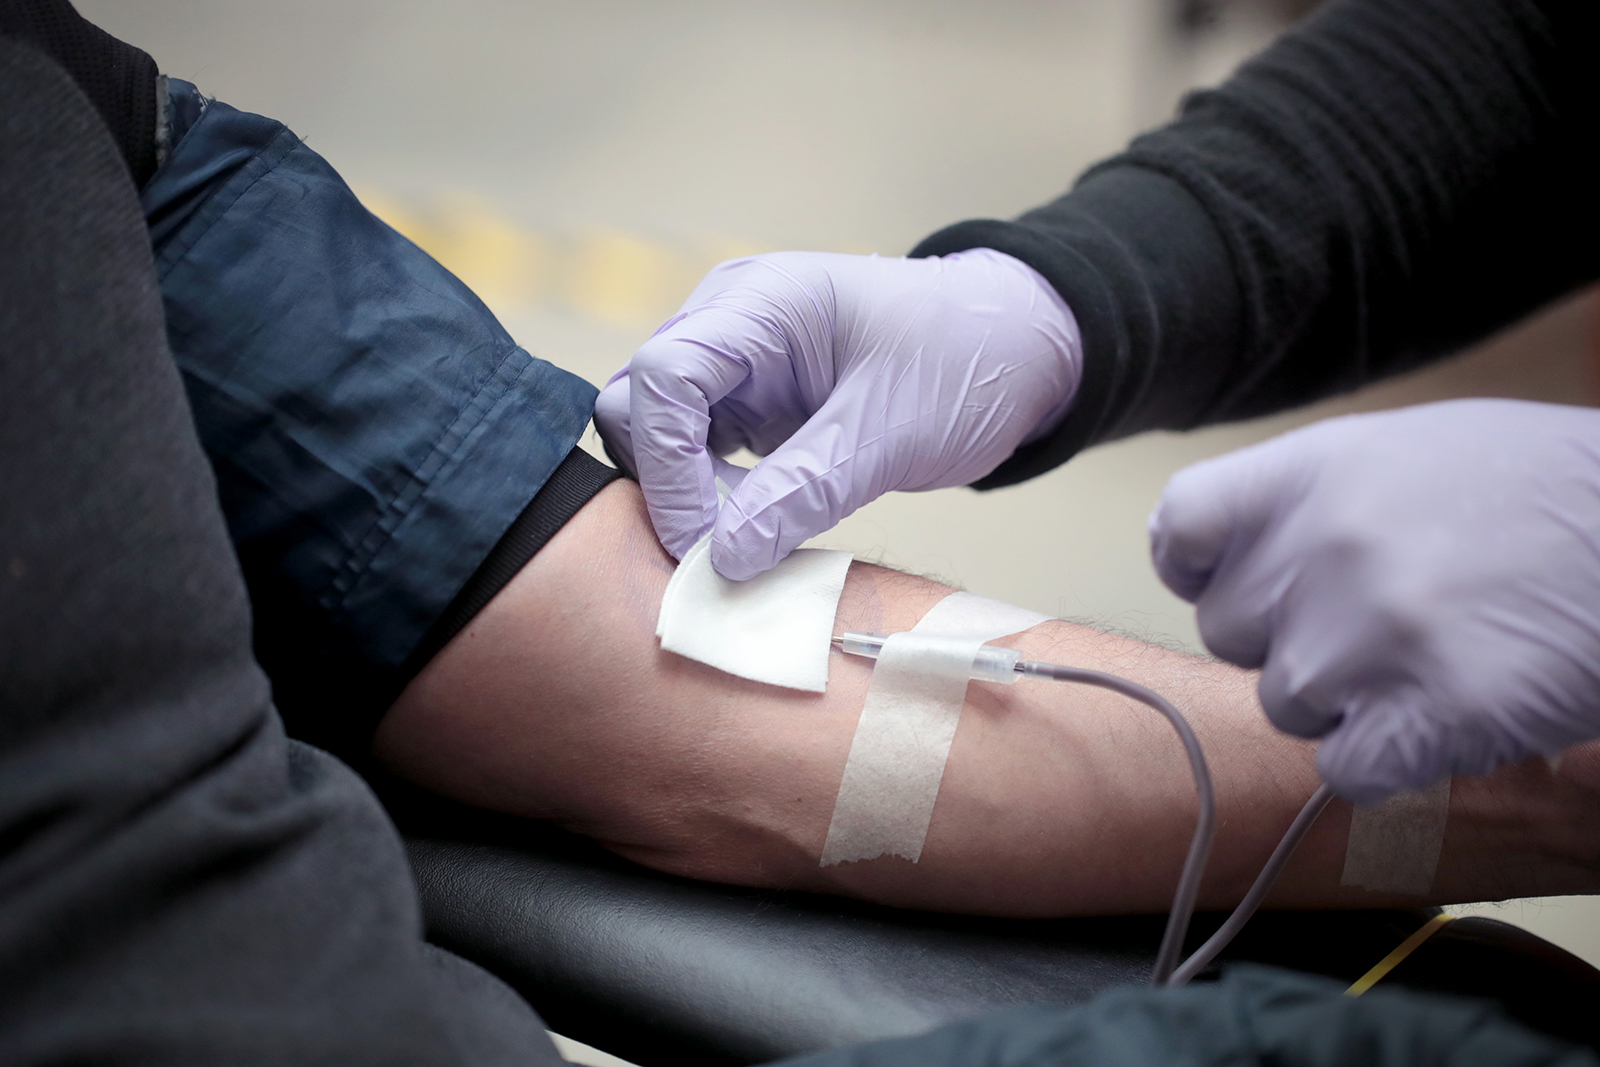 A volunteer donates blood during an American Red Cross blood drive in Chicago, on May 11.